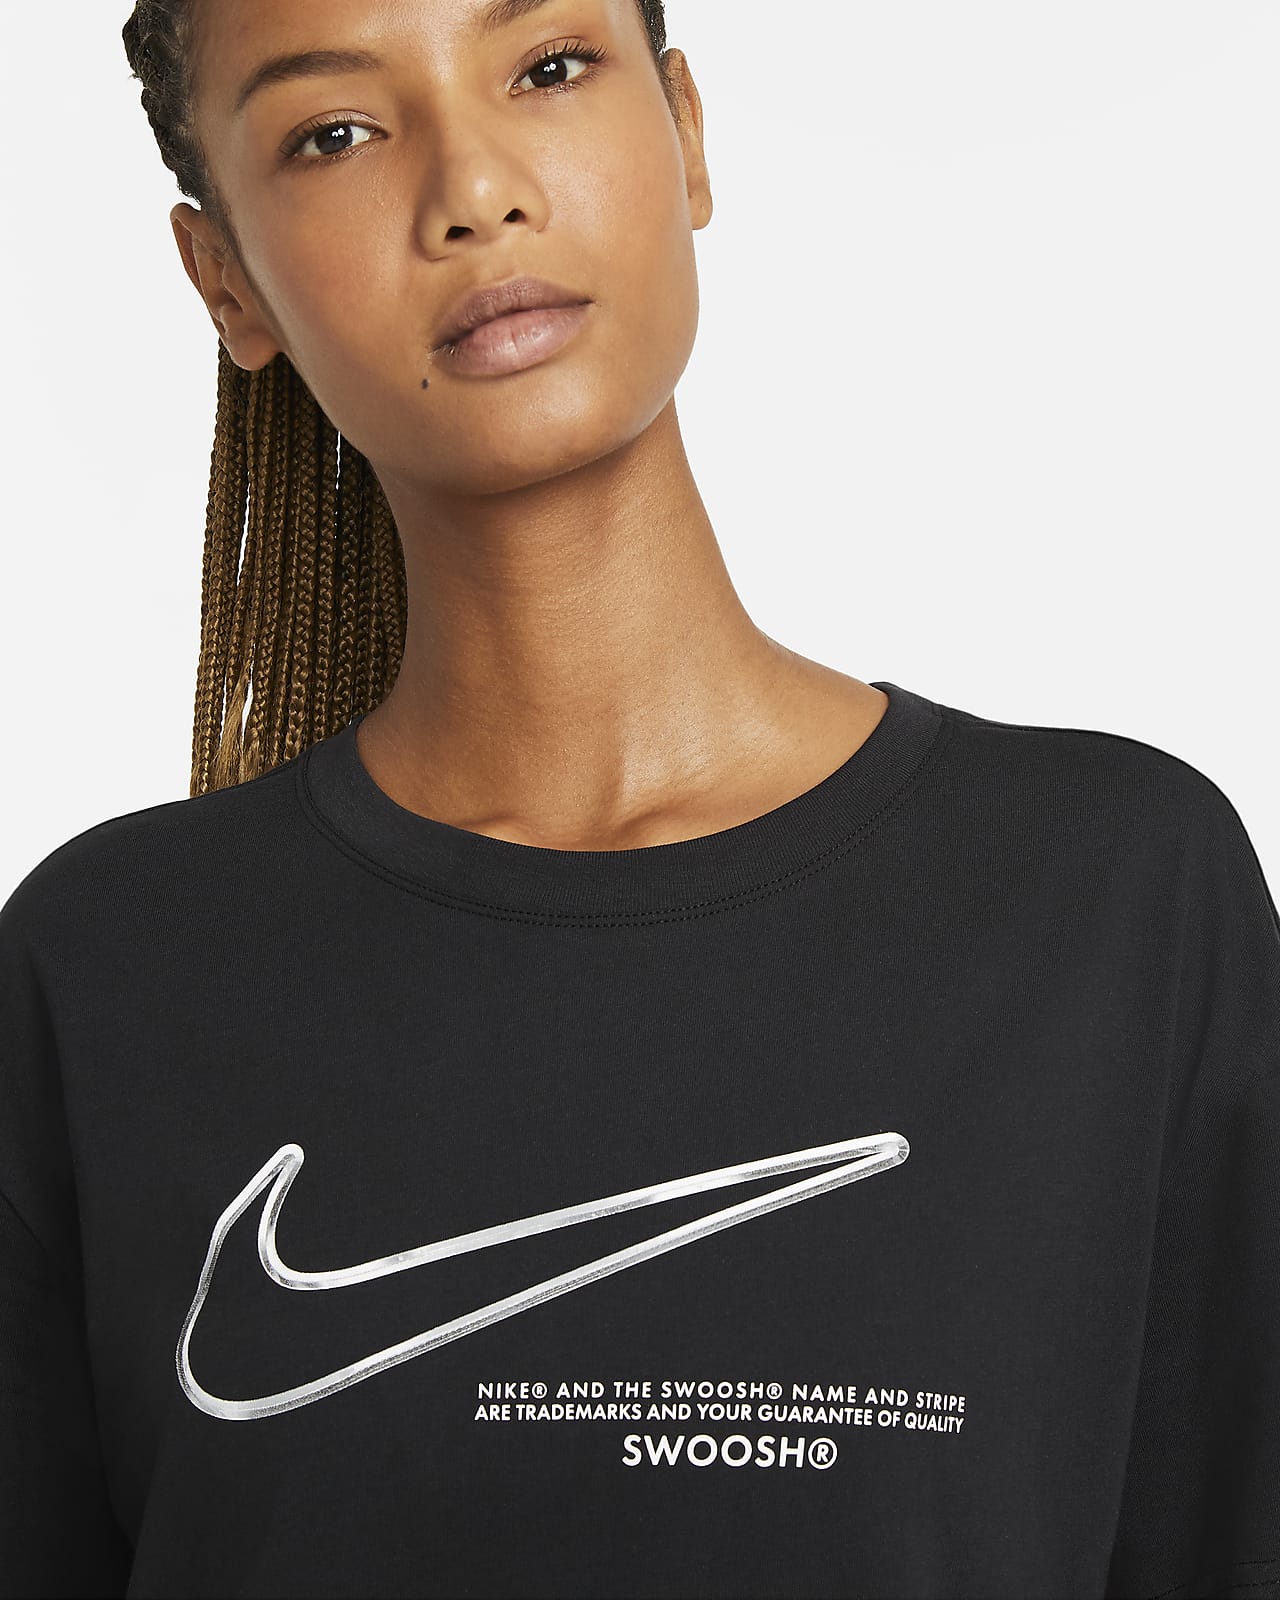 get your swoosh on nike shirt